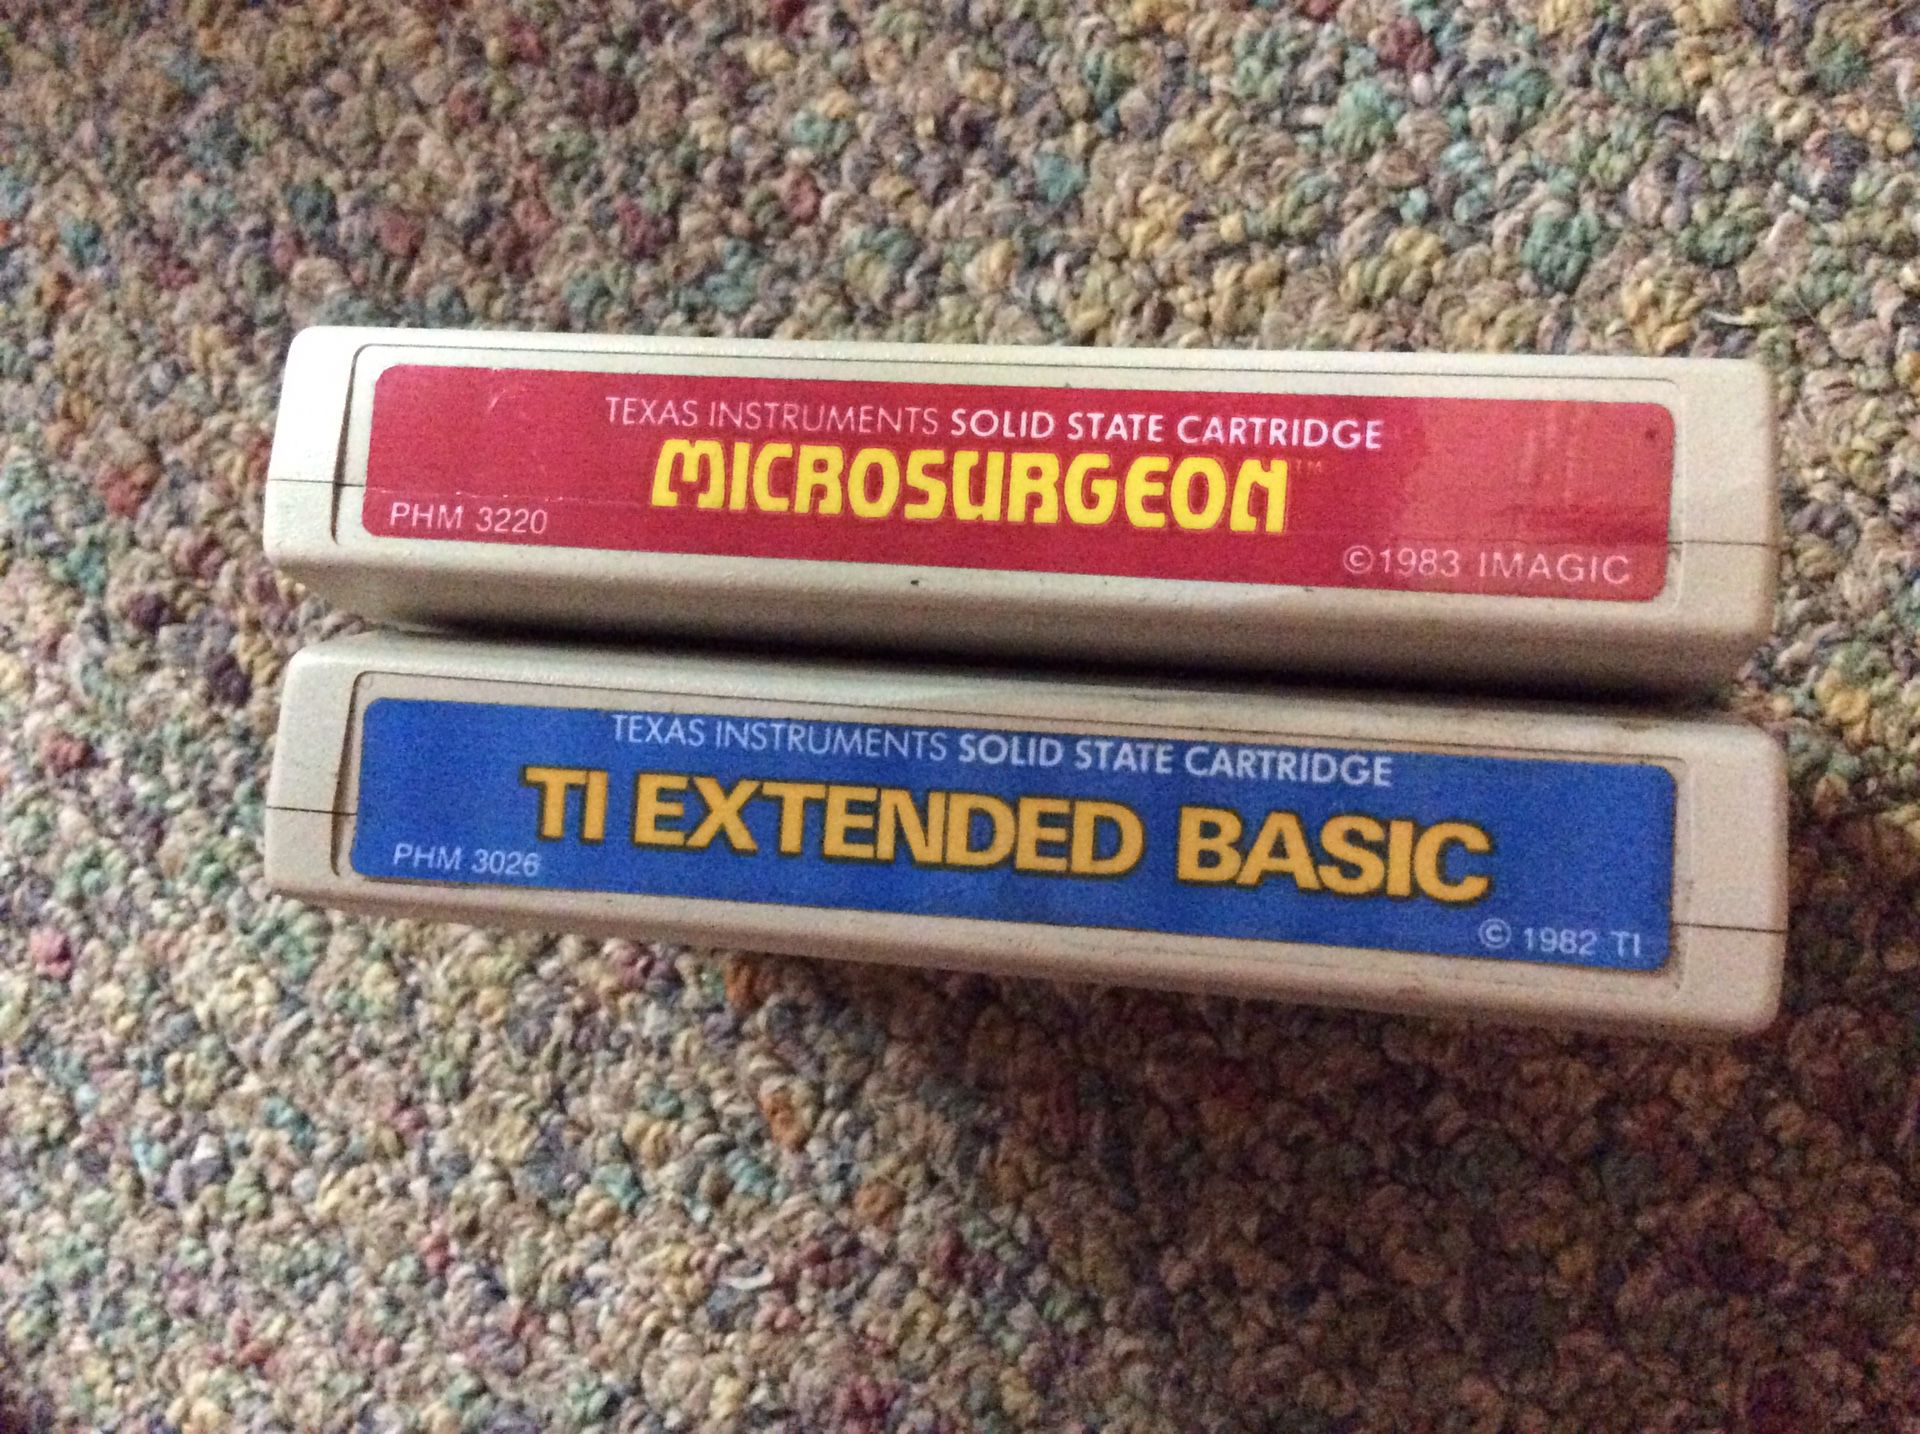 Texas Instruments game cartridges TI extended basic,Microsurgeon solid state cartridges